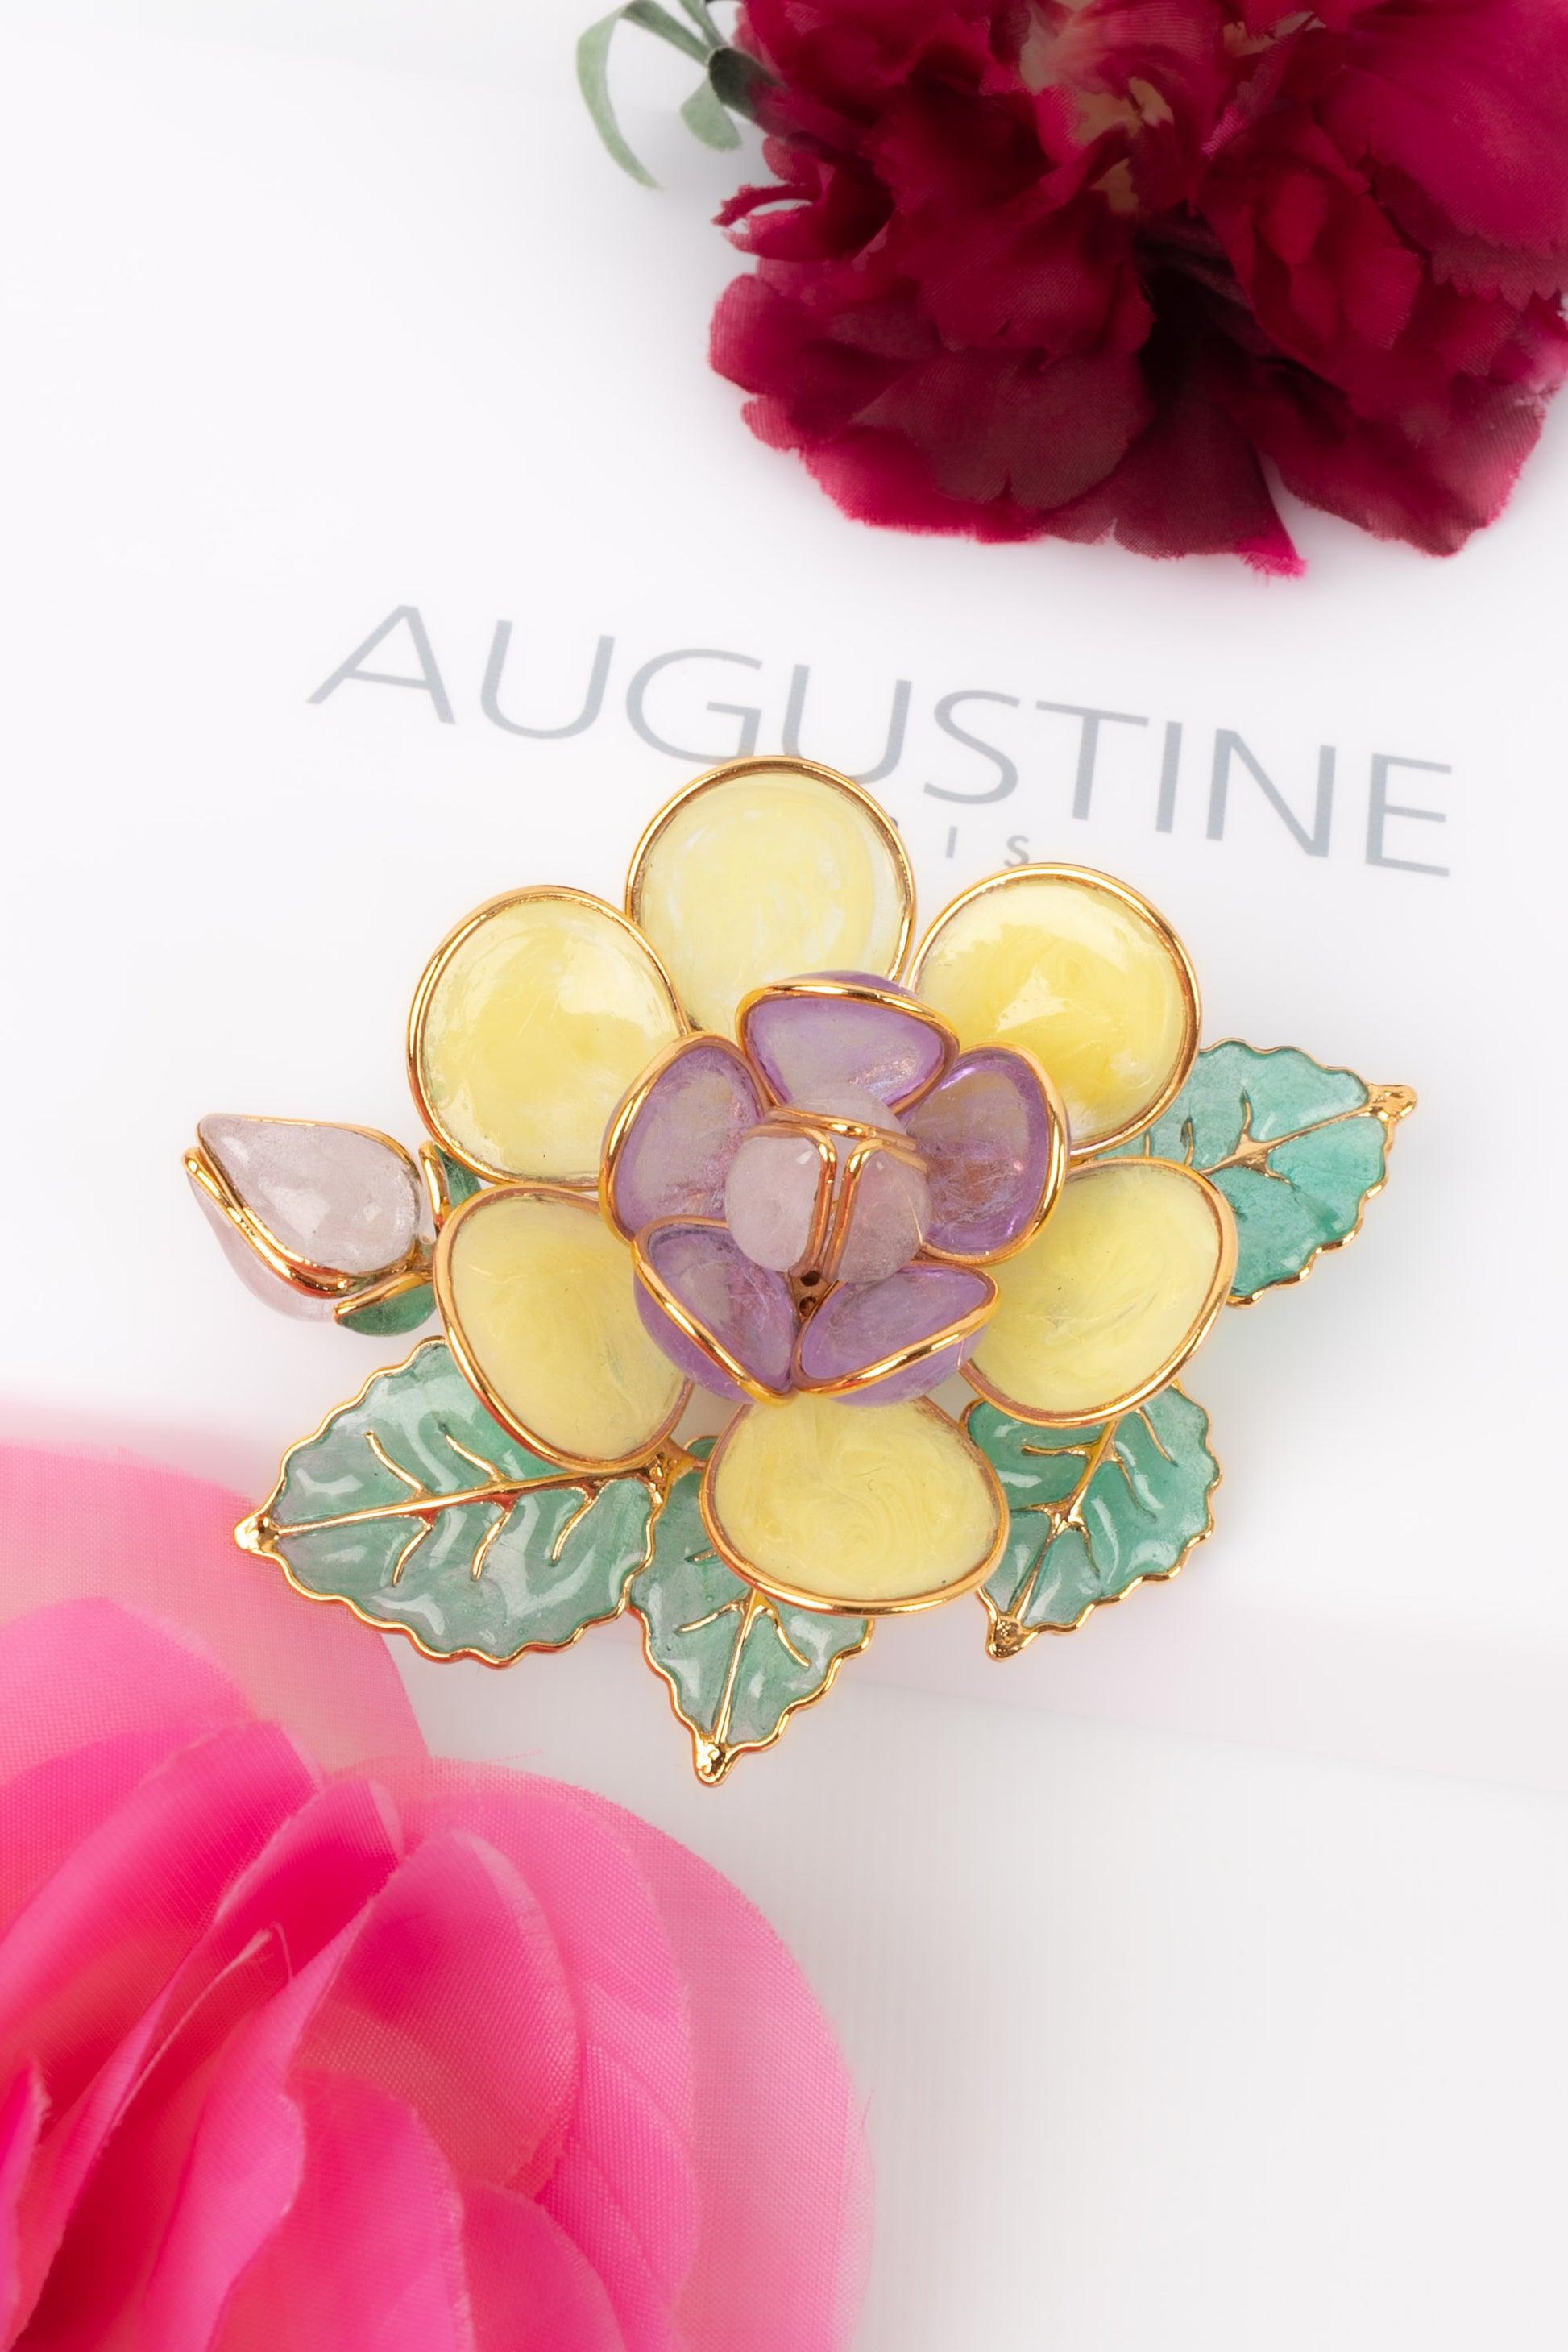 Augustine Golden Metal and Yellow Glass Paste Pendant Brooch For Sale 2